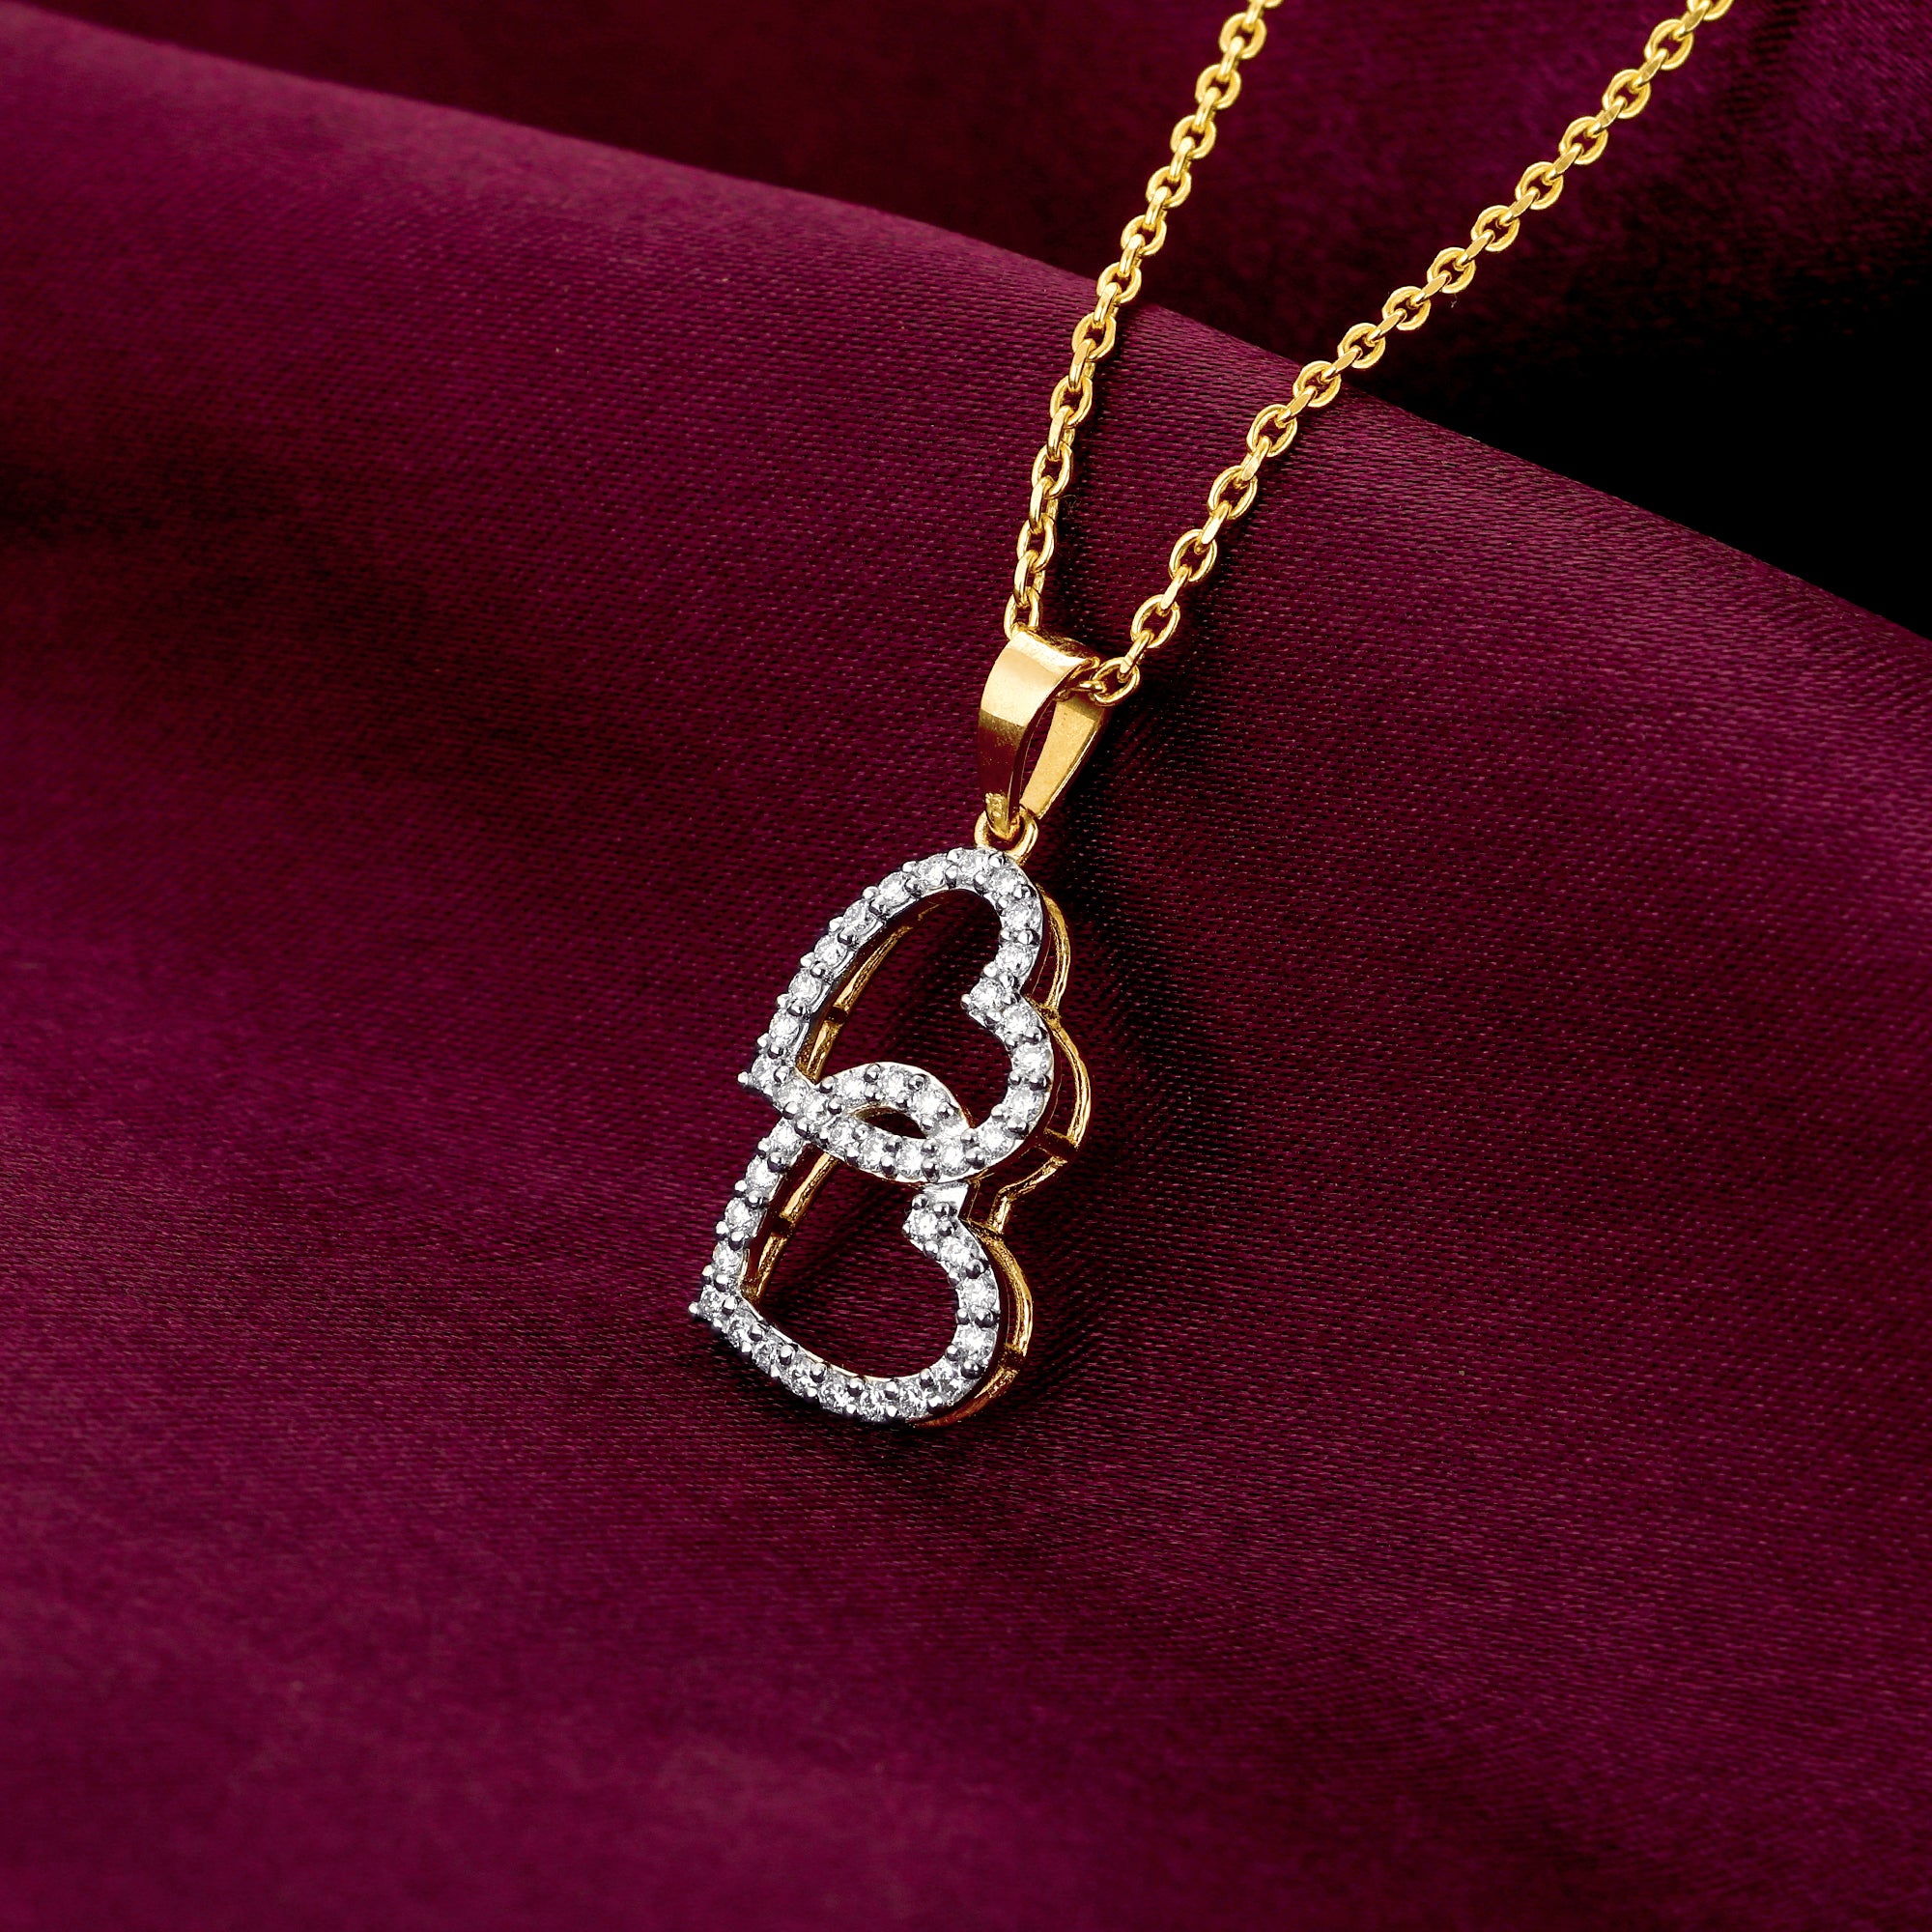 18ct White Gold Diamond Double Heart Necklace | Buy Online | Free Insured  UK Delivery